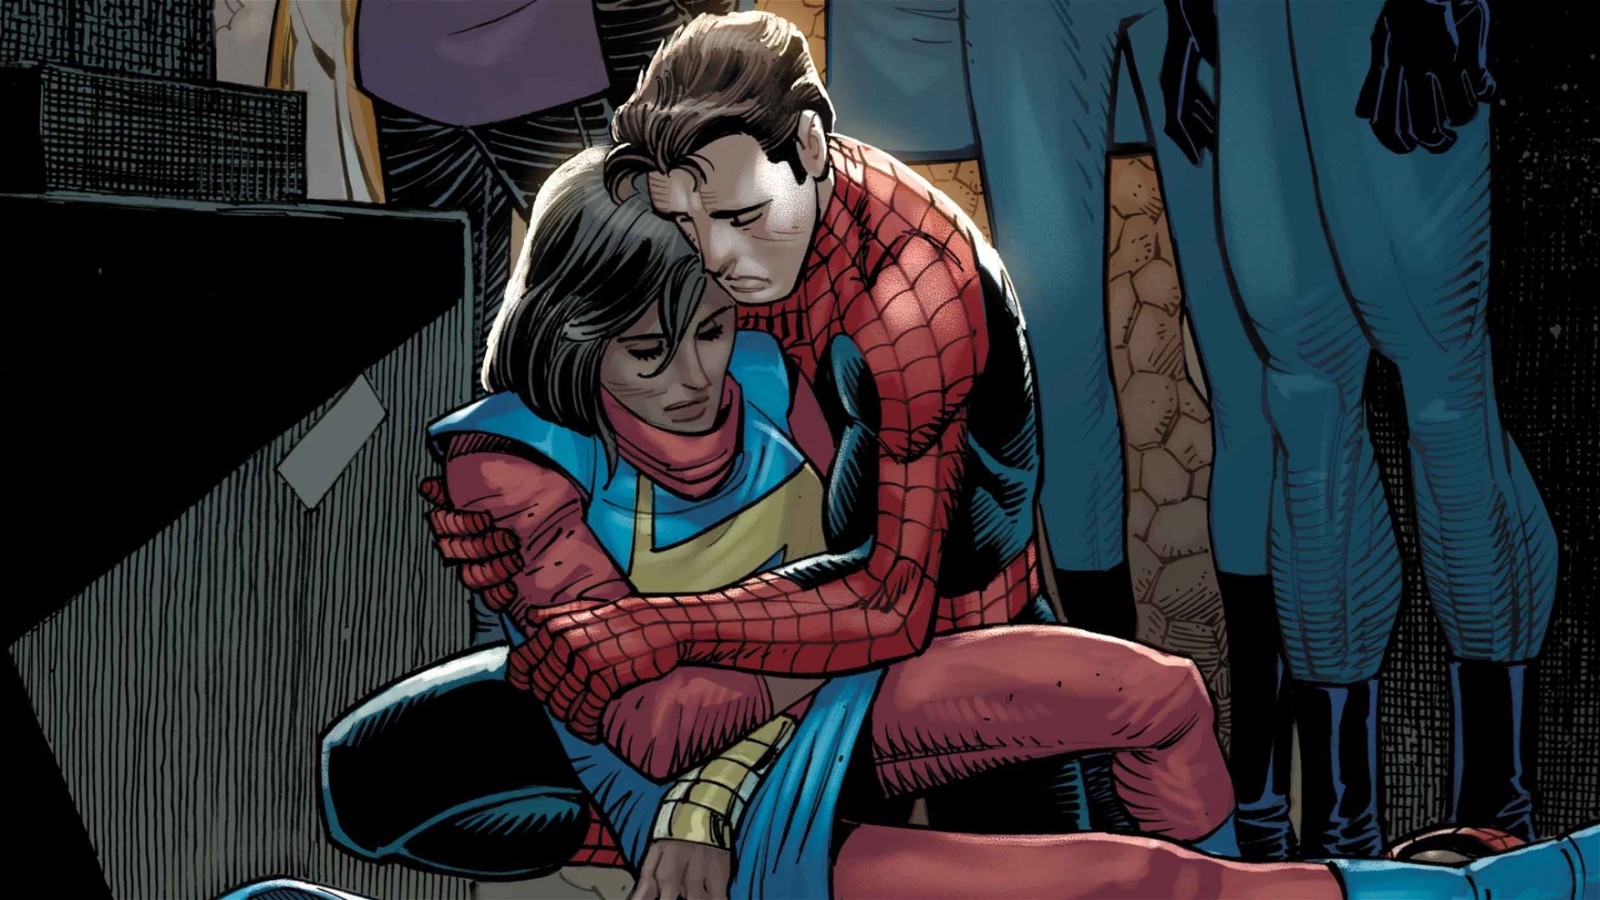 Kamala Khan's death in The Amazing Spider-Man #26 shocked fans for all the wrong reasons